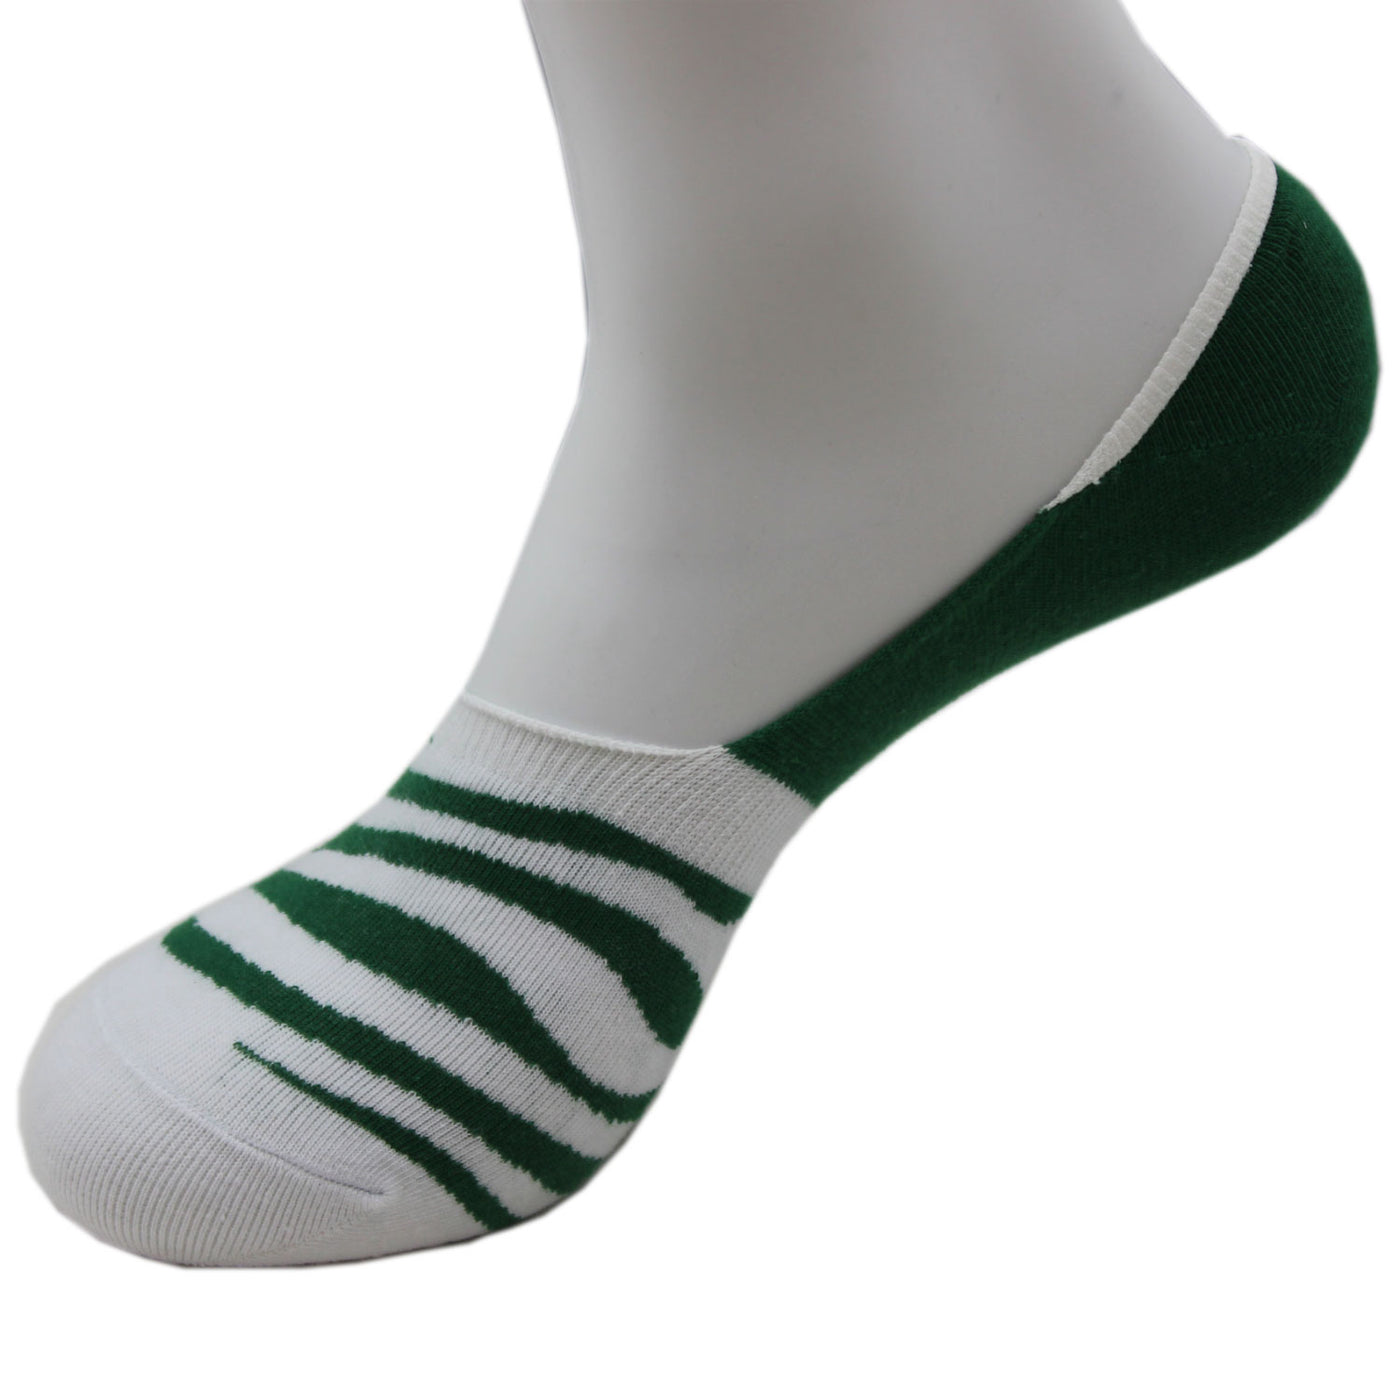 2 Pairs Finest Combed Cotton Invisible Socks Striped - Green